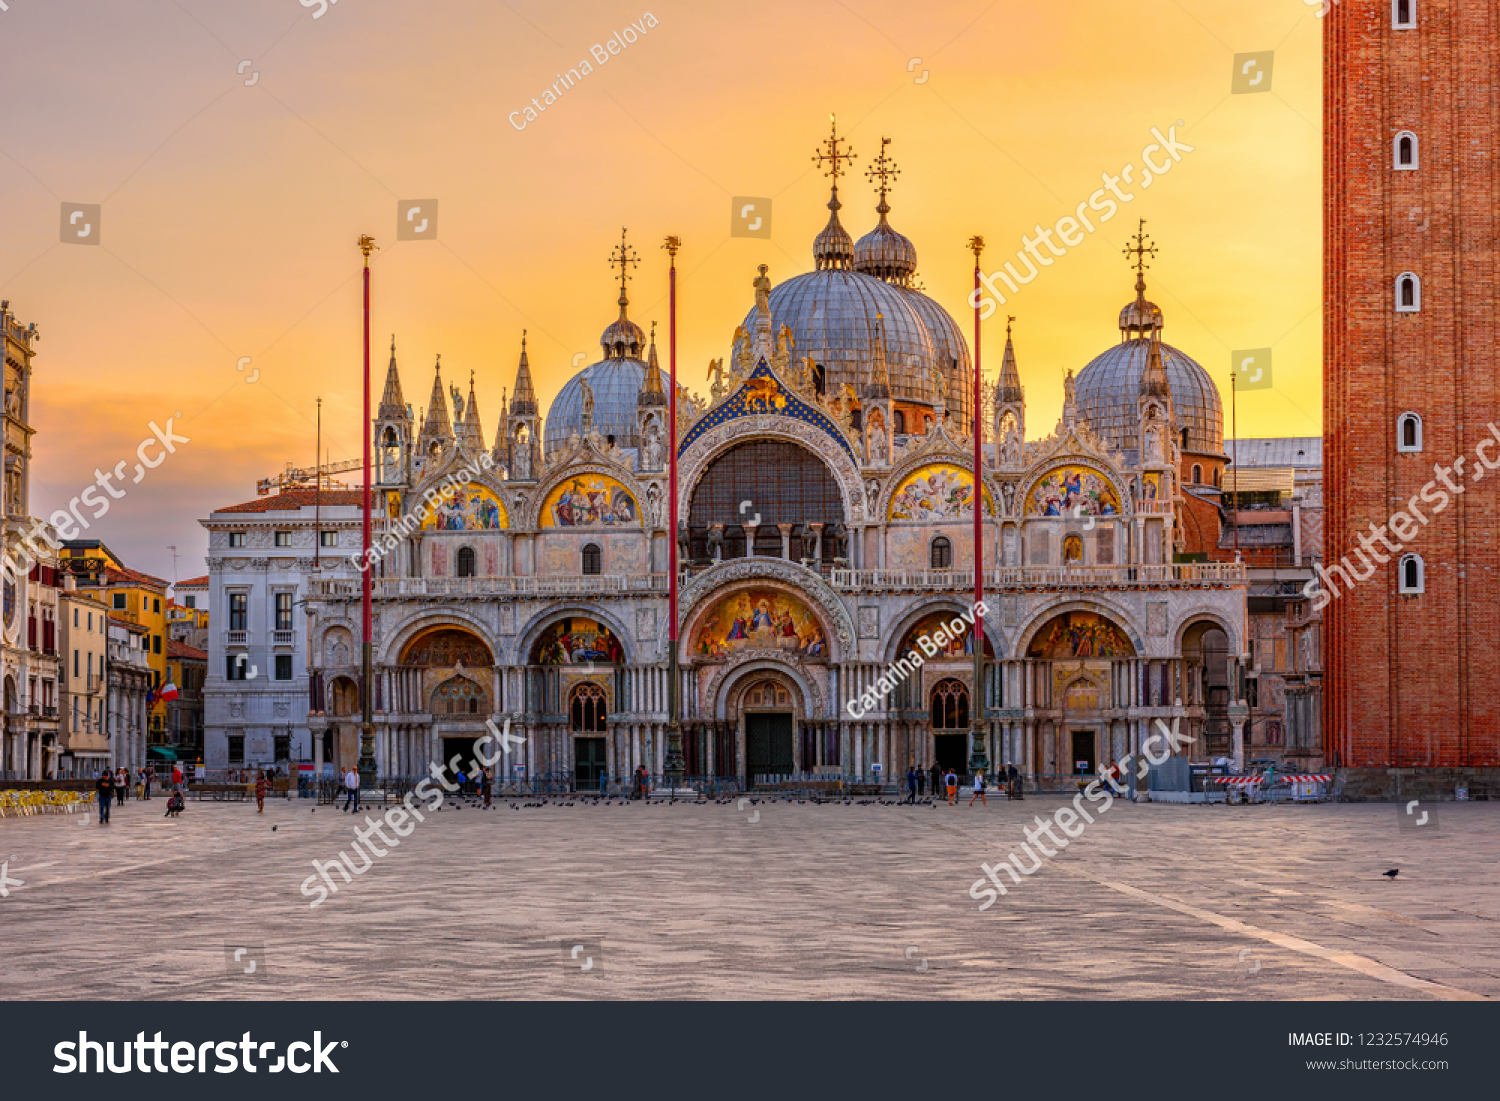 View of Basilica di San Marco and on piazza San Marco in Venice, Italy. Architecture and landmark of Venice. Sunrise cityscape of Venice. #1232574946